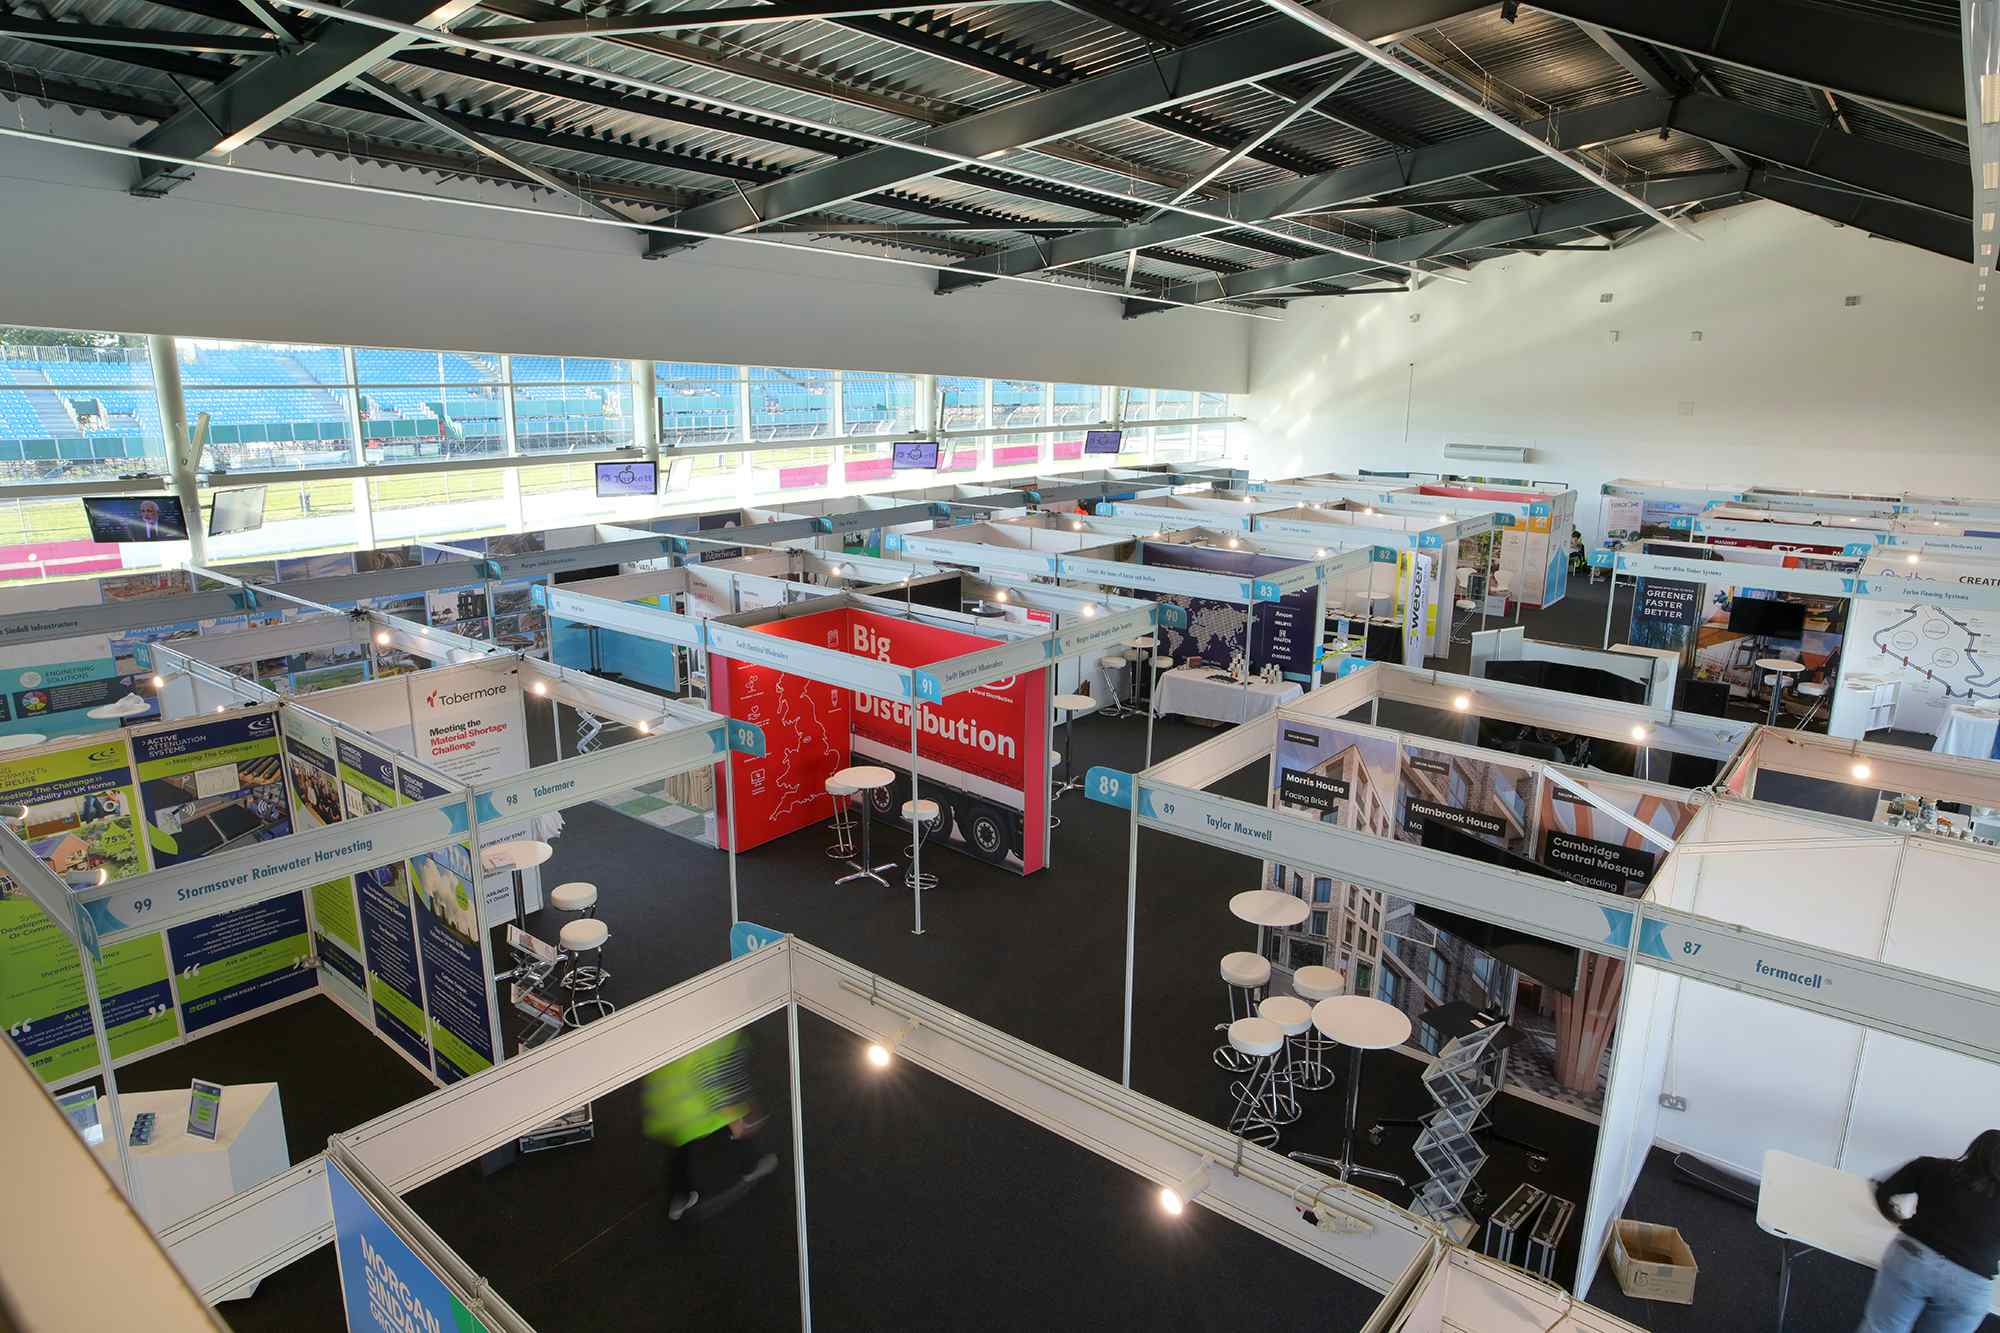 Hall 2, Silverstone International Conference & Exhibition Centre